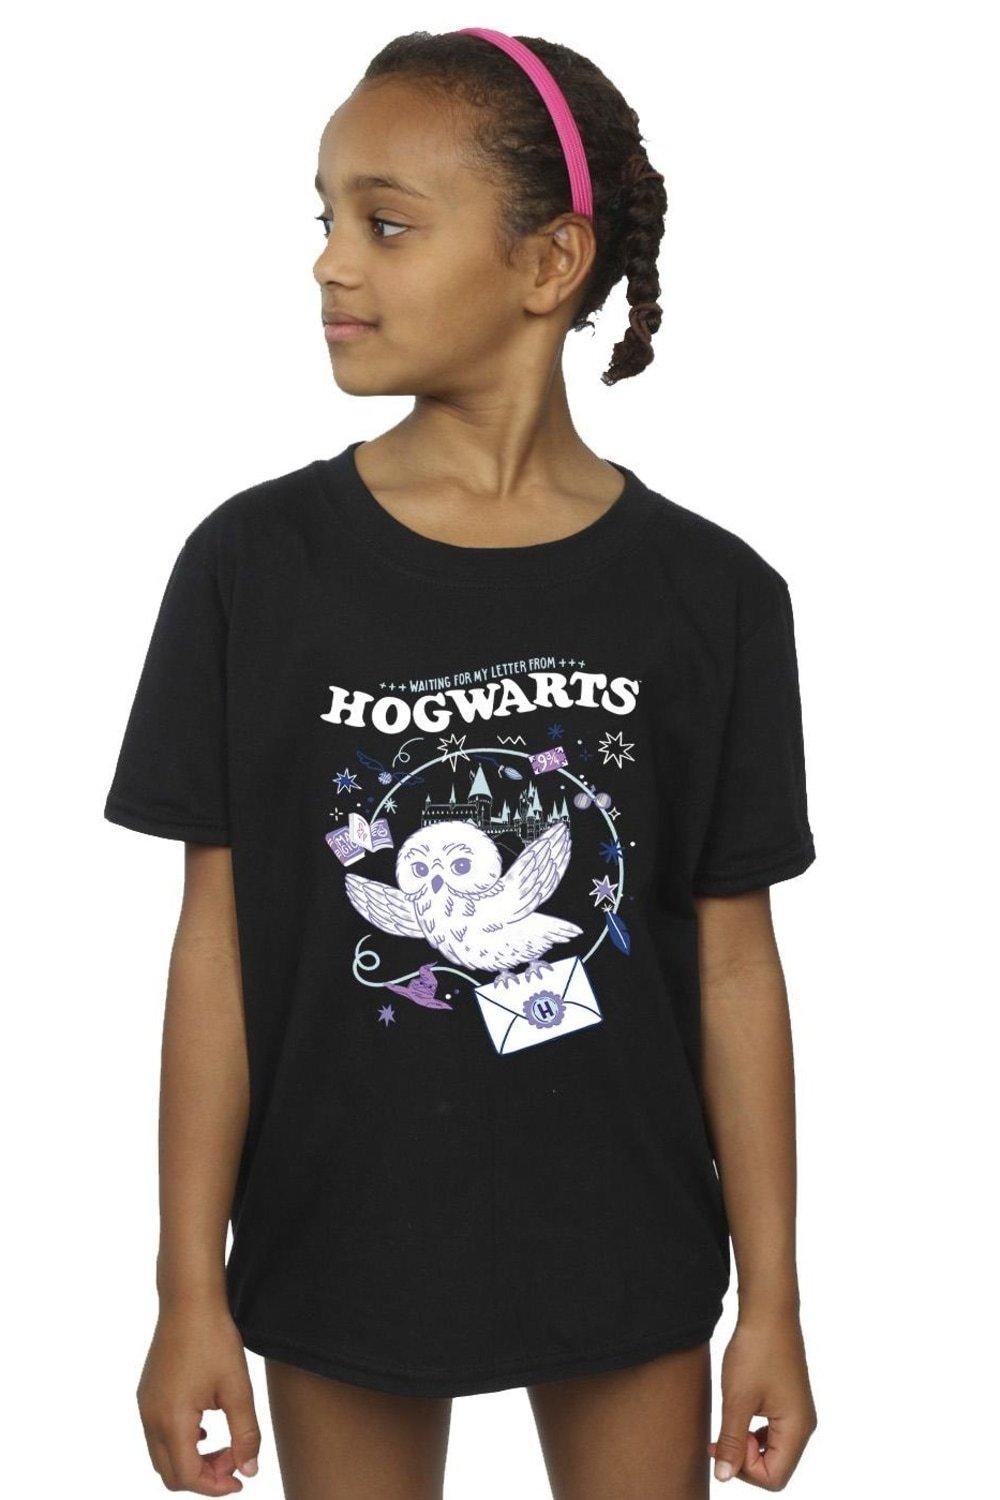 Owl Letter From Hogwarts Cotton T-Shirt